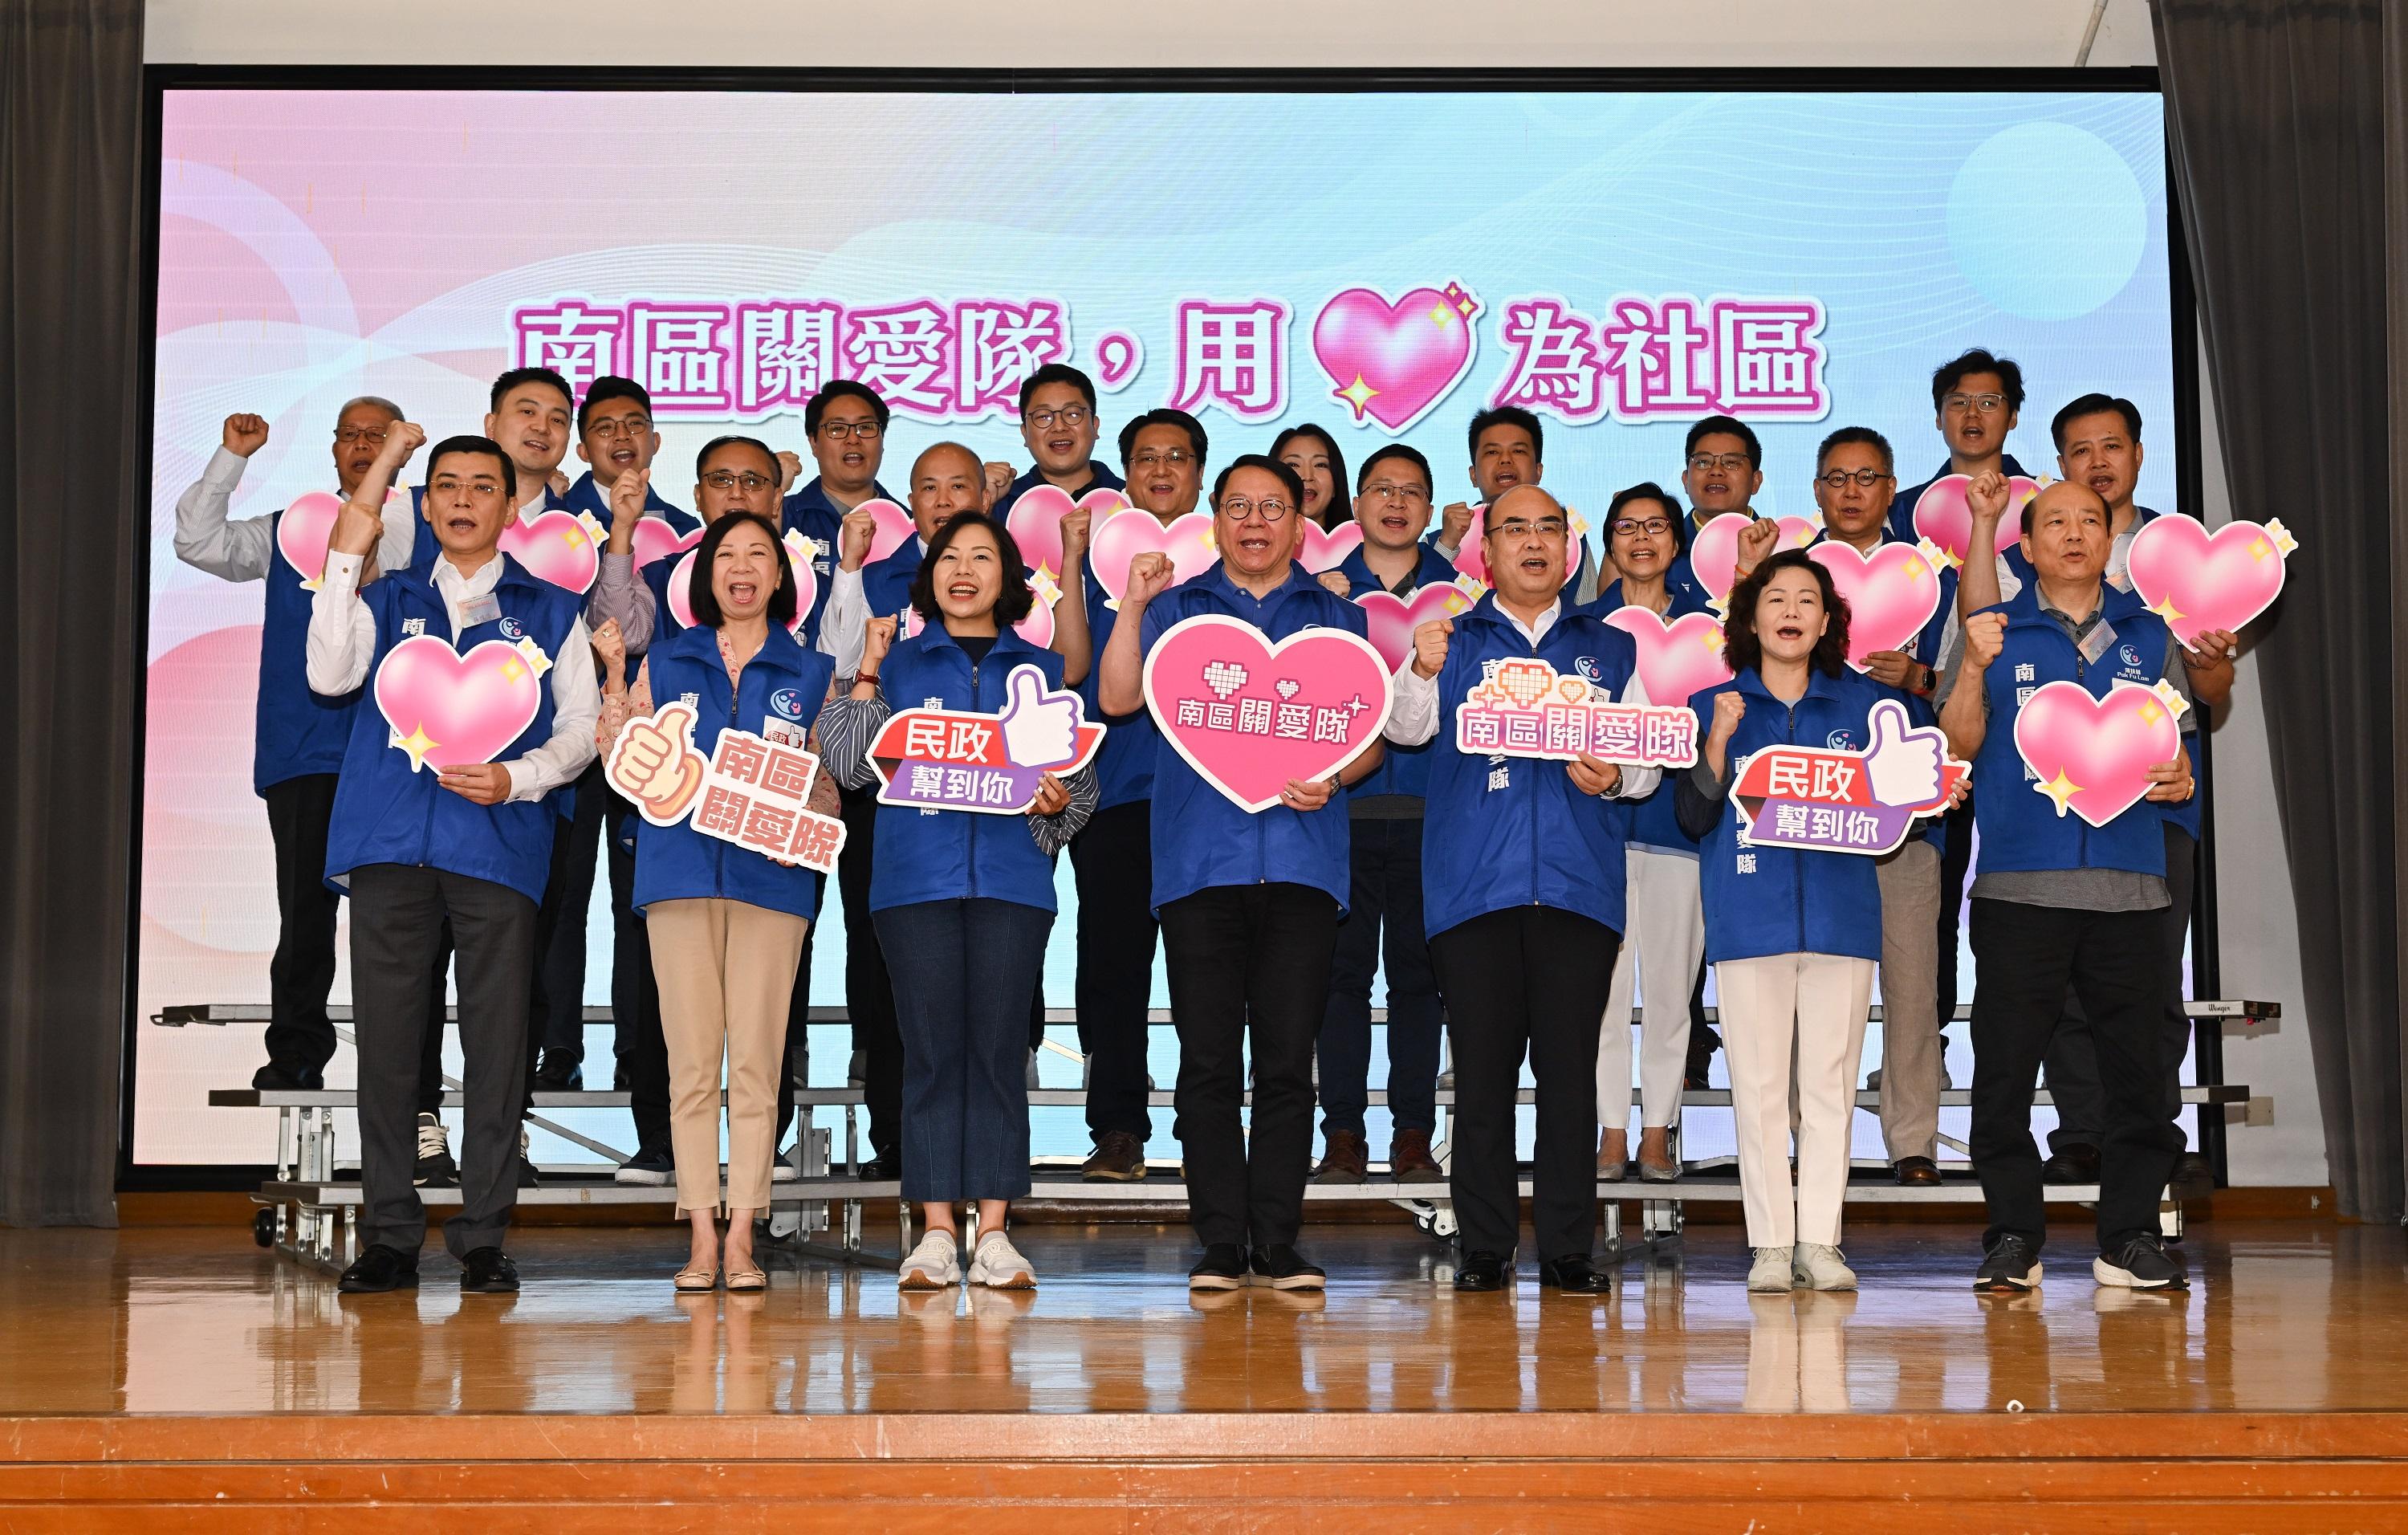 The Chief Secretary for Administration, Mr Chan Kwok-ki, attended the pledging ceremony of Care Teams in Southern District today (April 30). Photo shows (first row, from left) the President of the Hong Kong Island Federation, Mr Xue Boran;  the Permanent Secretary for Home and Youth Affairs, Ms Shirley Lam; the Secretary for Home and Youth Affairs, Miss Alice Mak; Mr Chan; the Director-General of the Hong Kong Island Sub-office of the Liaison Office of the Central People's Government in the Hong Kong Special Administrative Region, Mr Xue Huijun; the Director of Home Affairs, Mrs Alice Cheung; the President of Hong Kong Southern District Community Association, Mr Chan Nam-po, and other guests officiating at the pledging ceremony.